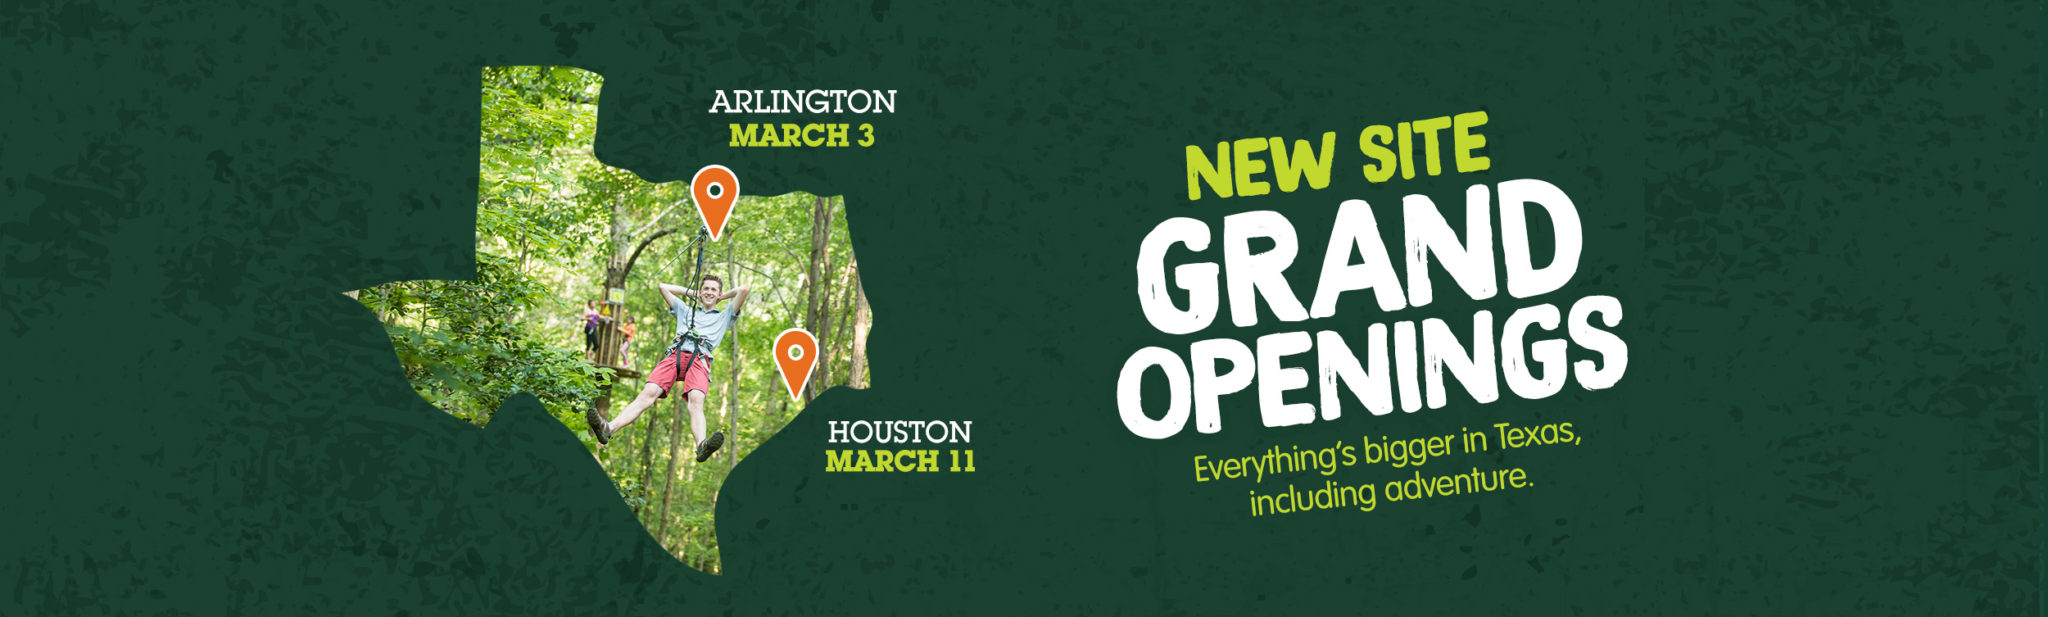 New Site Grand Openings